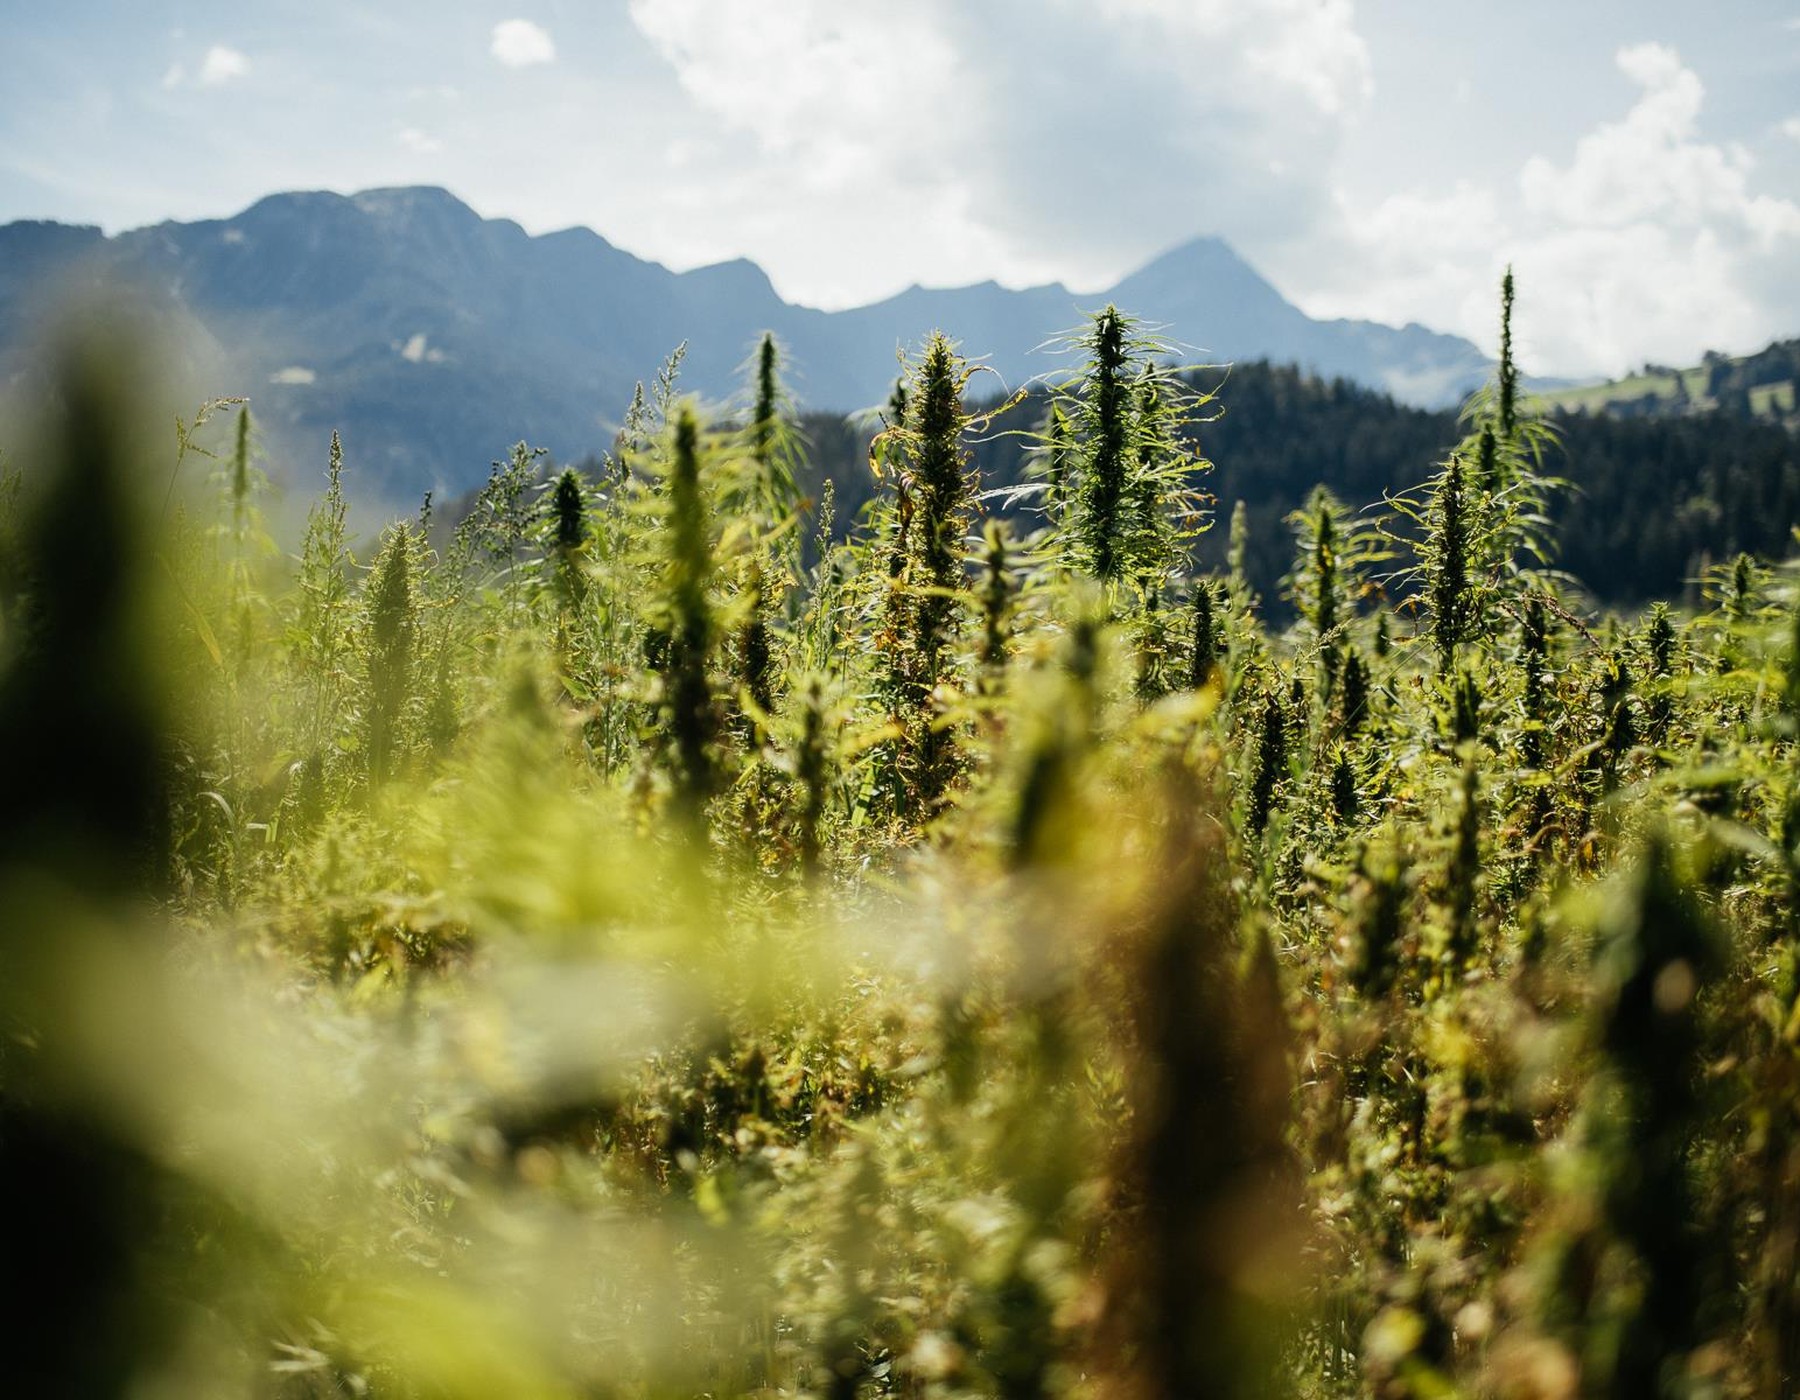 Image of Recultivation of hemp in Switzerland as a valuable foodstuff